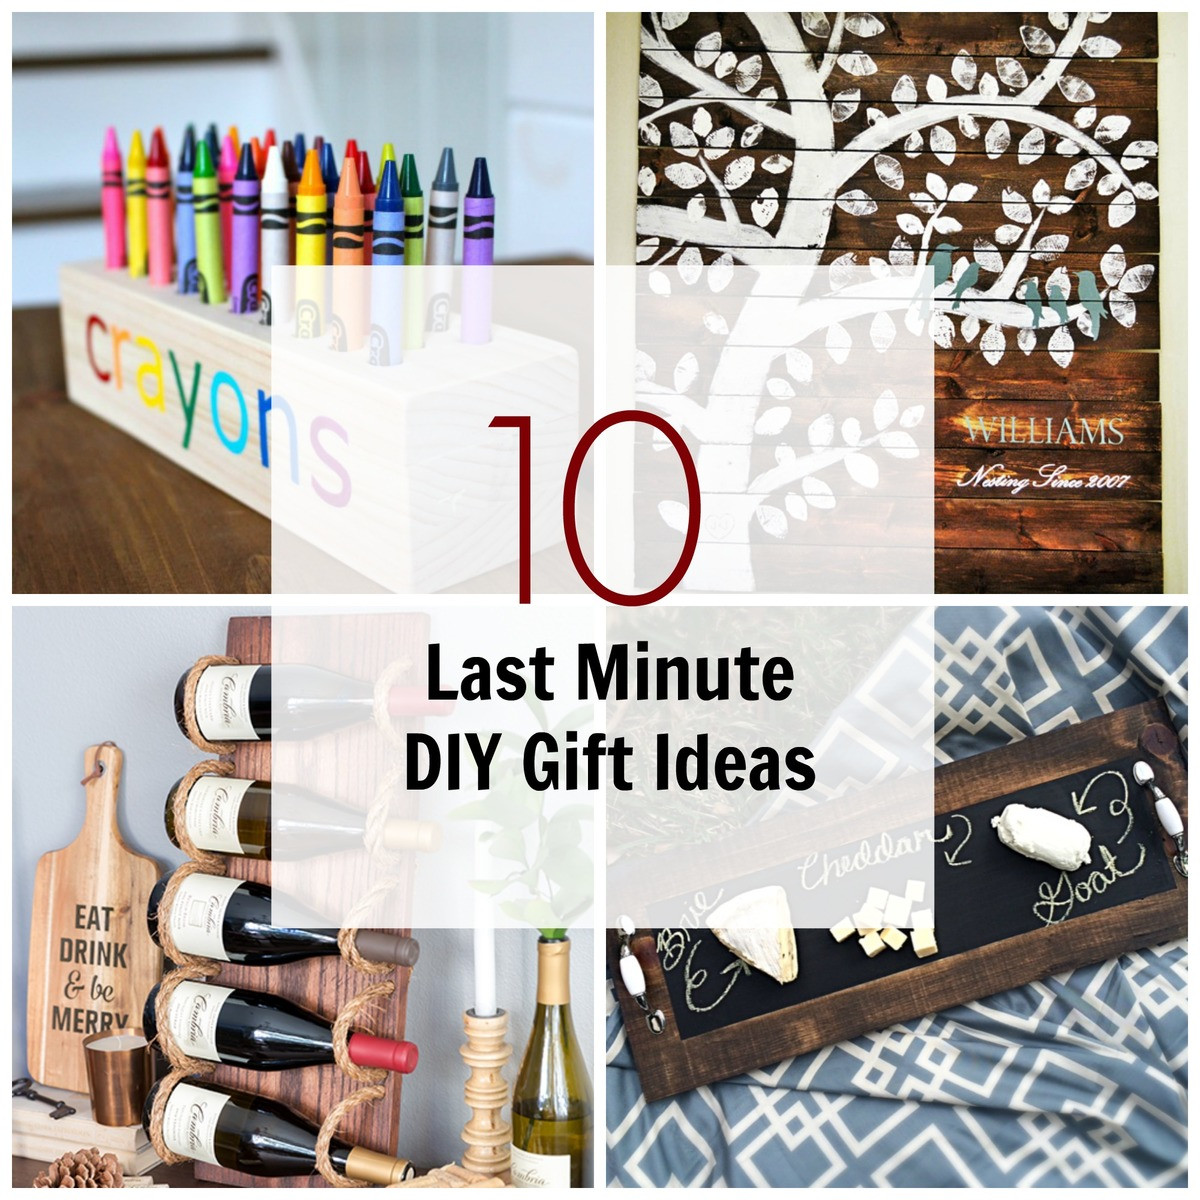 DIY Wooden Christmas Gifts
 10 Last Minute DIY Wood Gifts that you Can Make